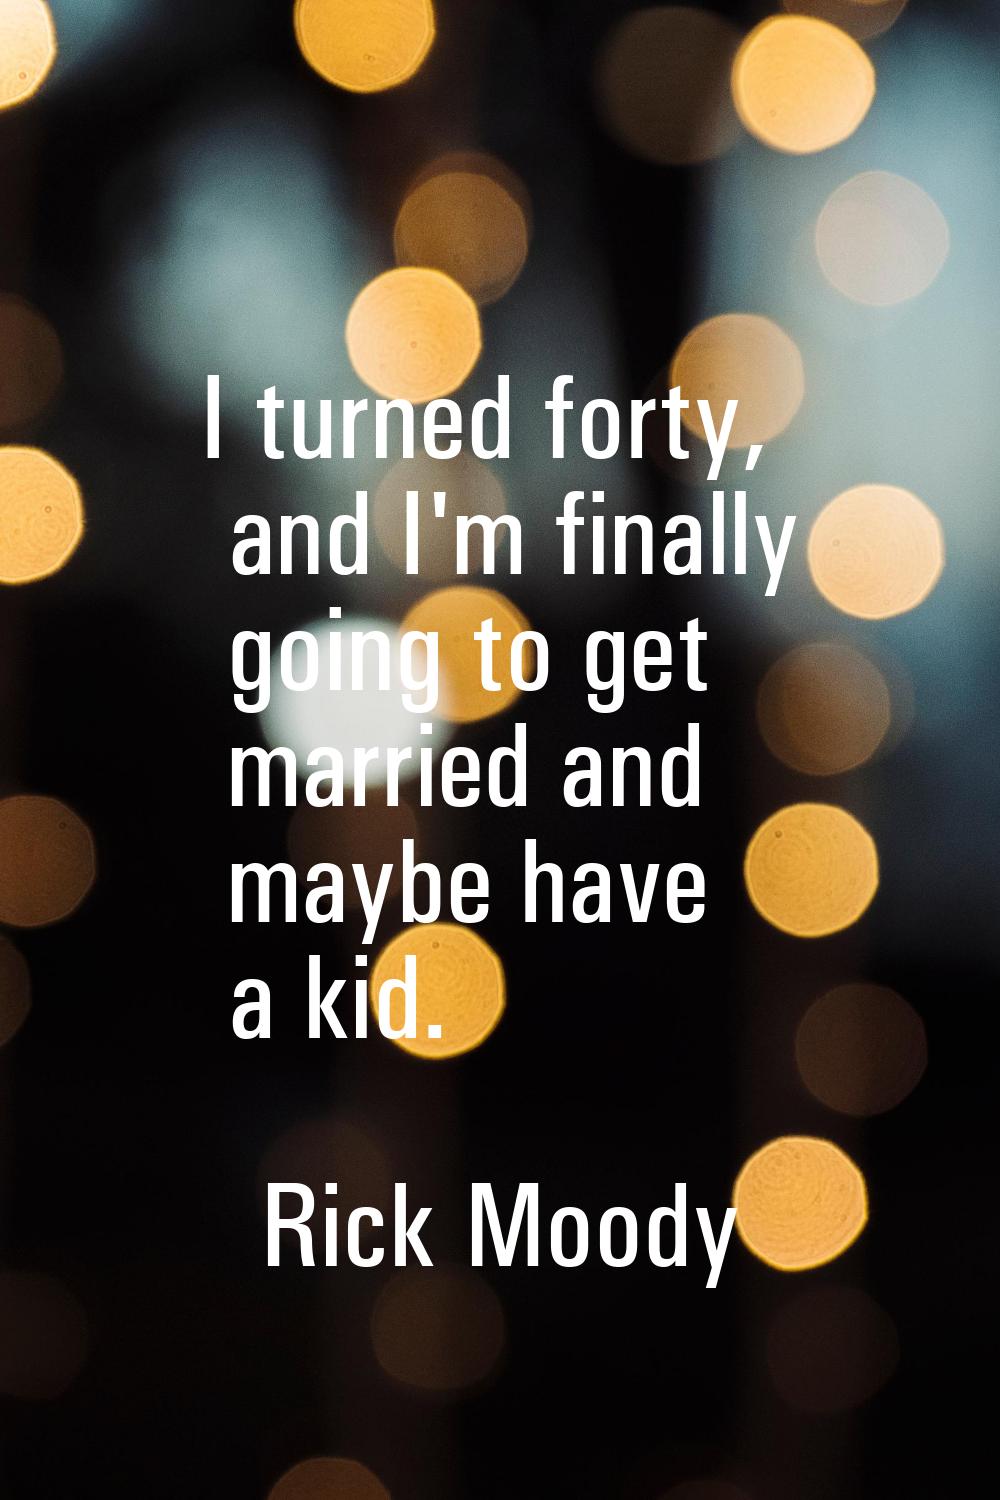 I turned forty, and I'm finally going to get married and maybe have a kid.